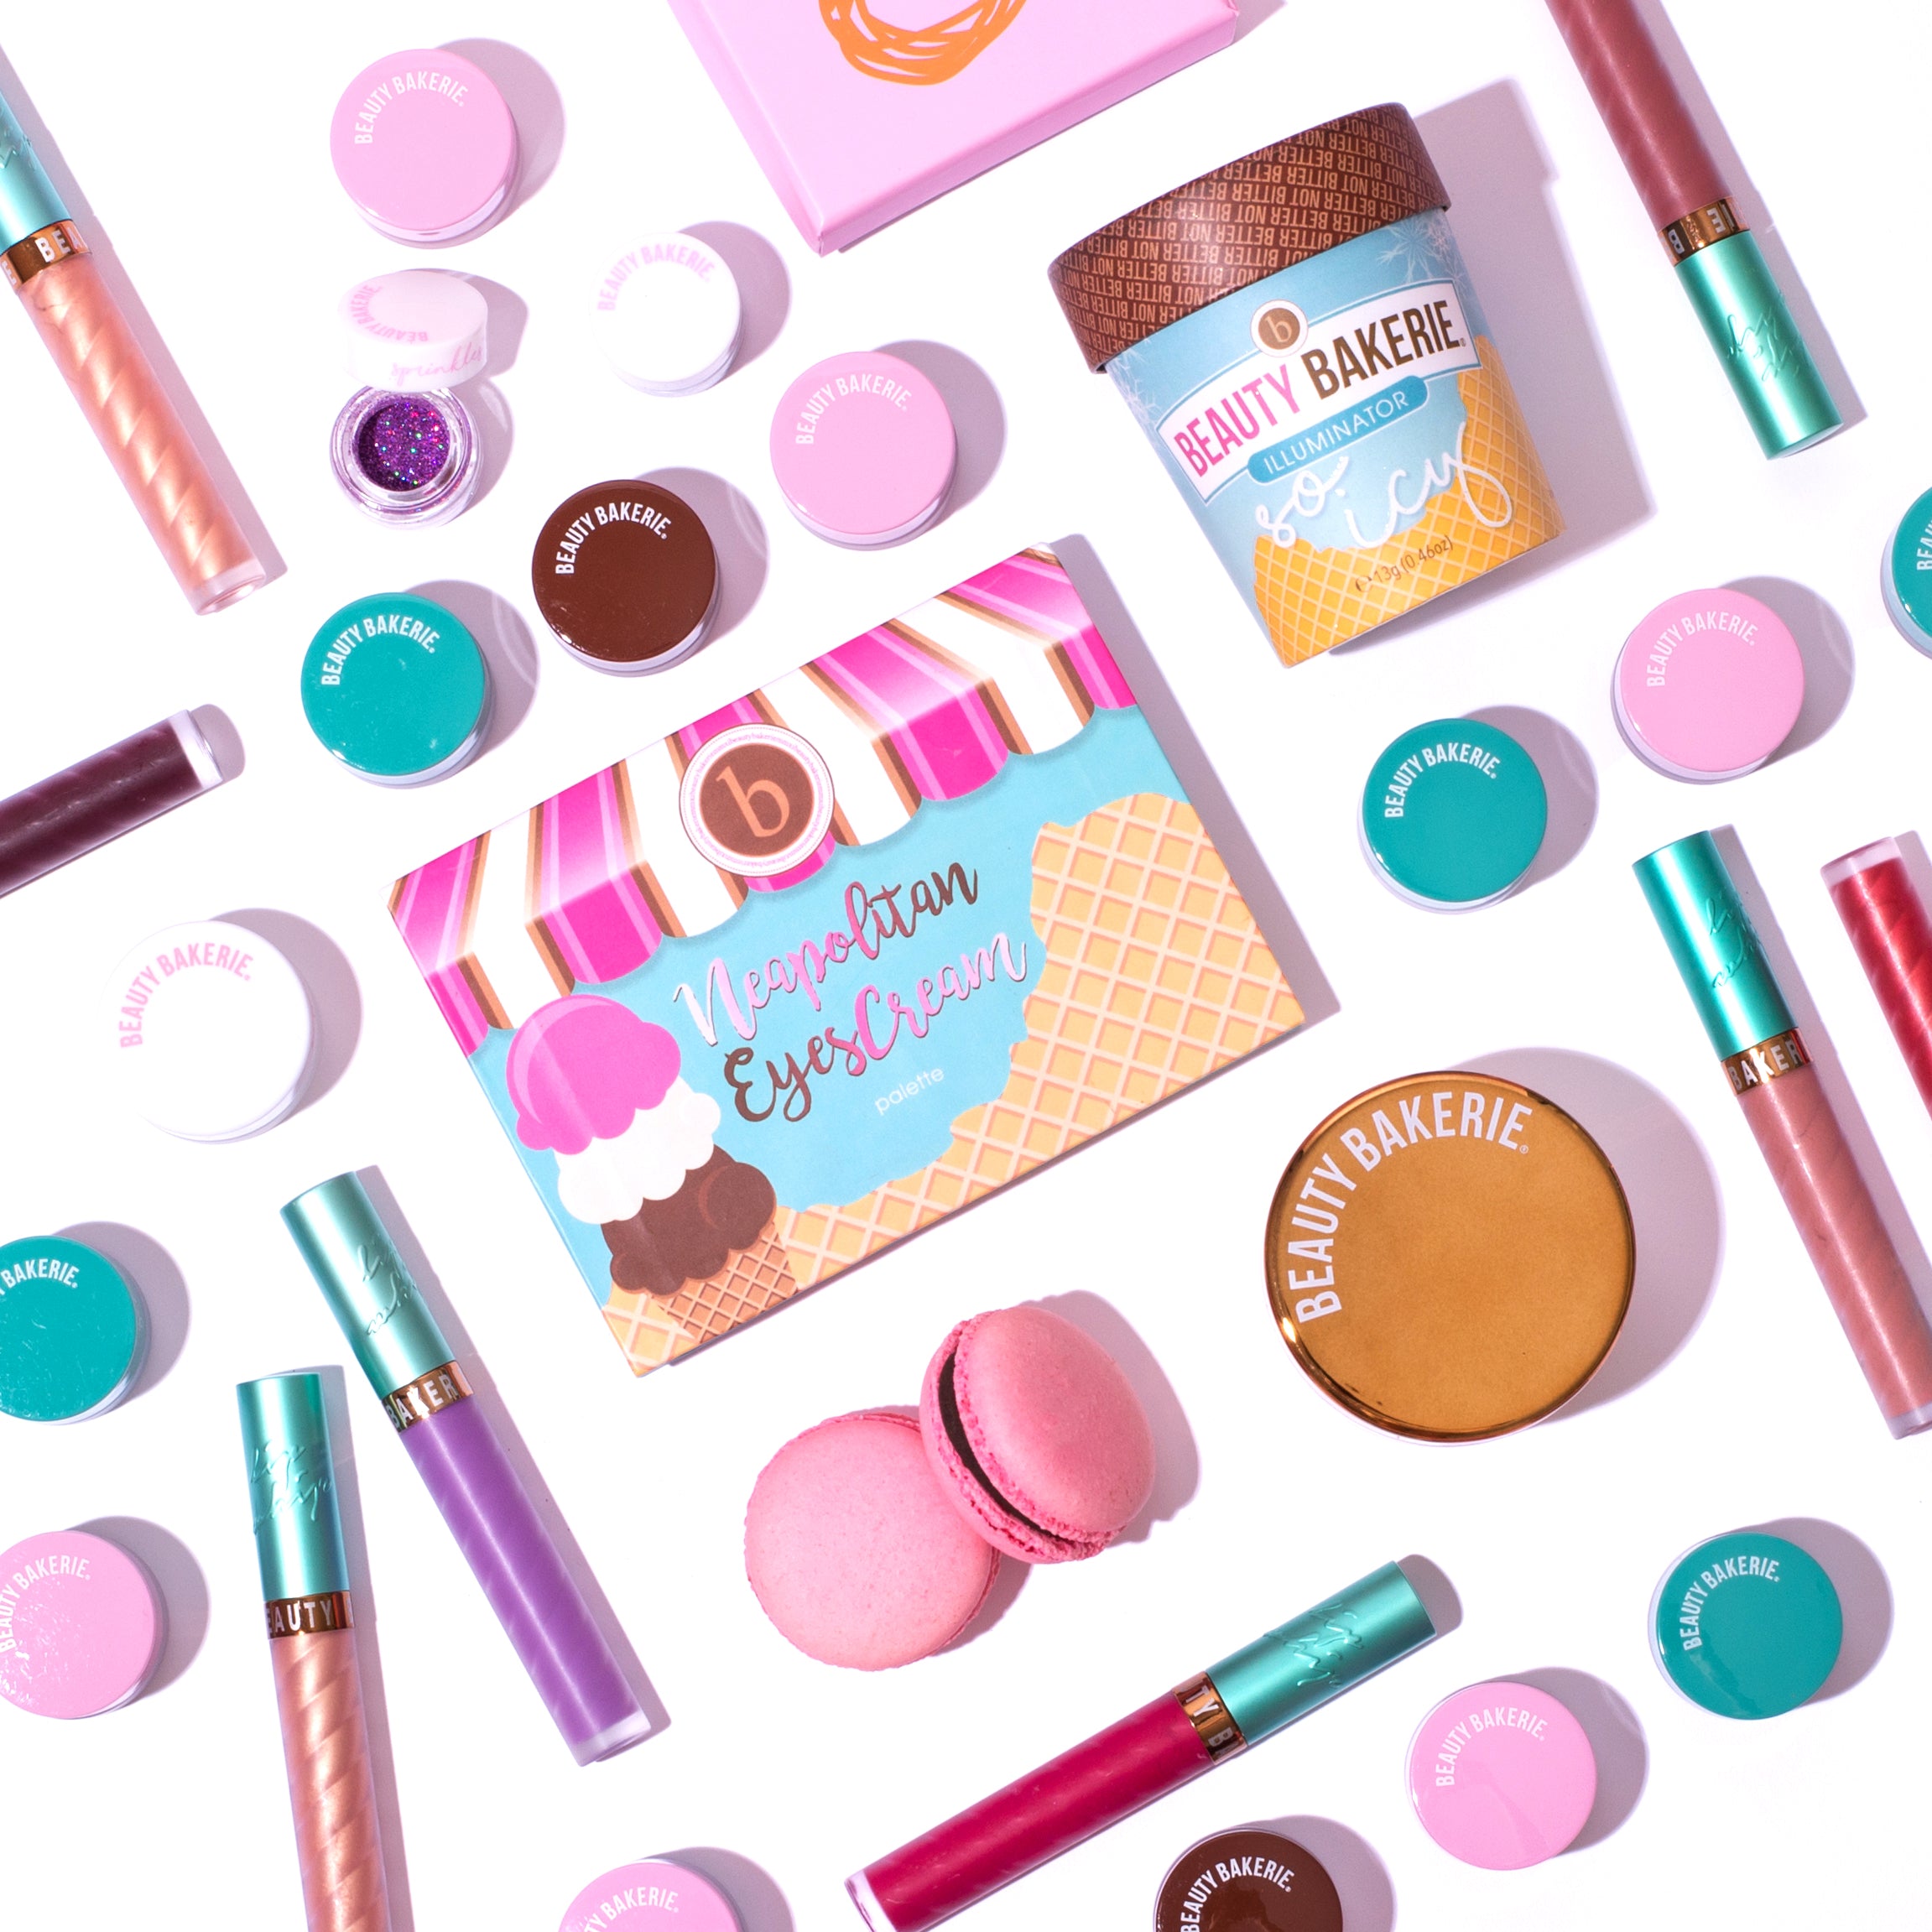 A Letter From Beauty Bakerie